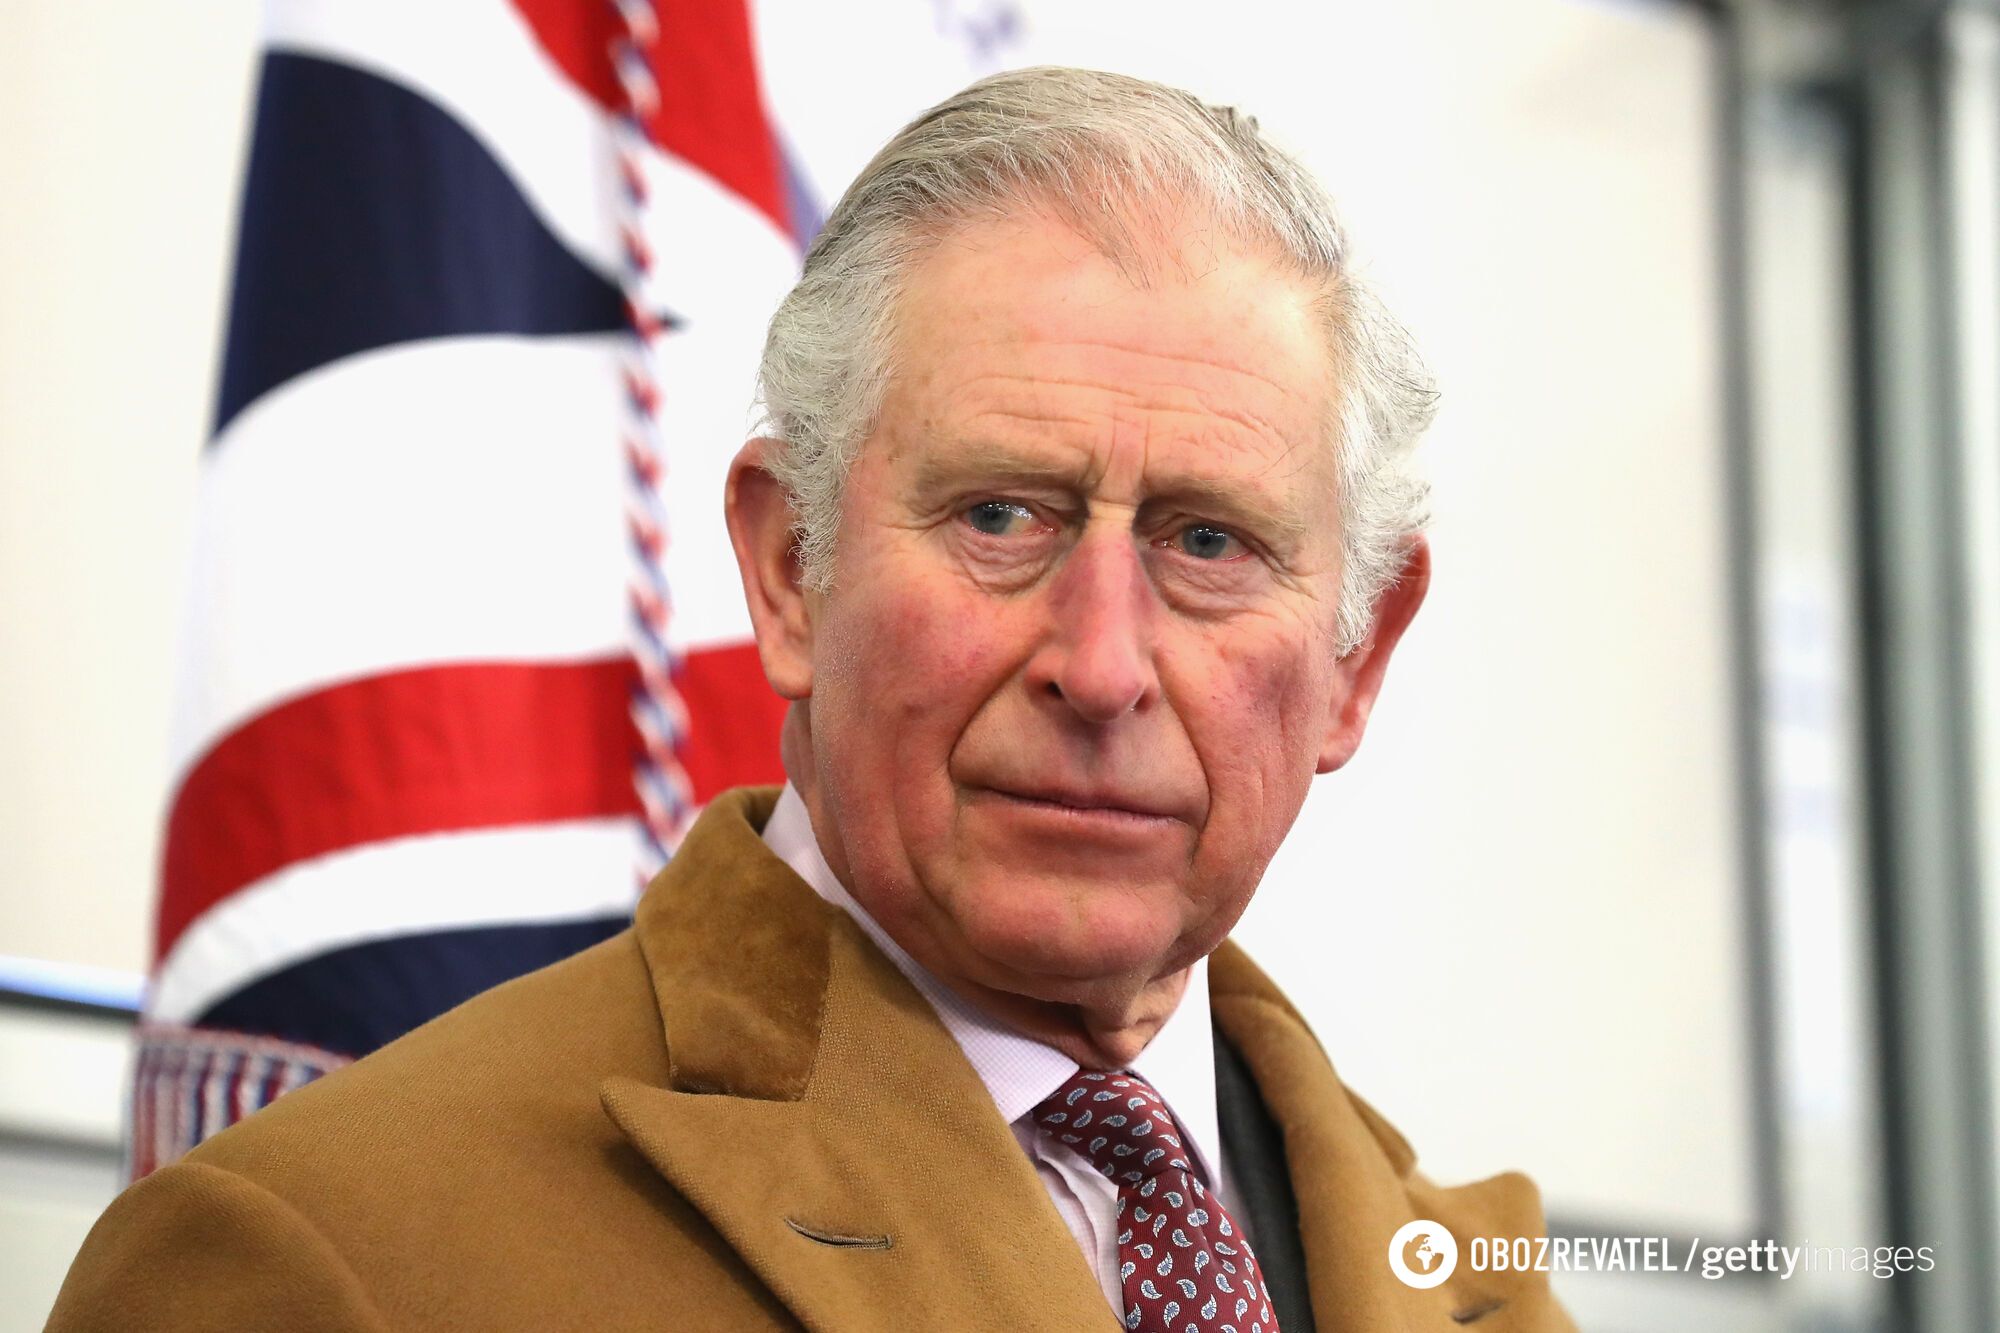 The UK has developed a plan in case of the death of King Charles III, who was diagnosed with cancer: what does Operation Menai Bridge mean?